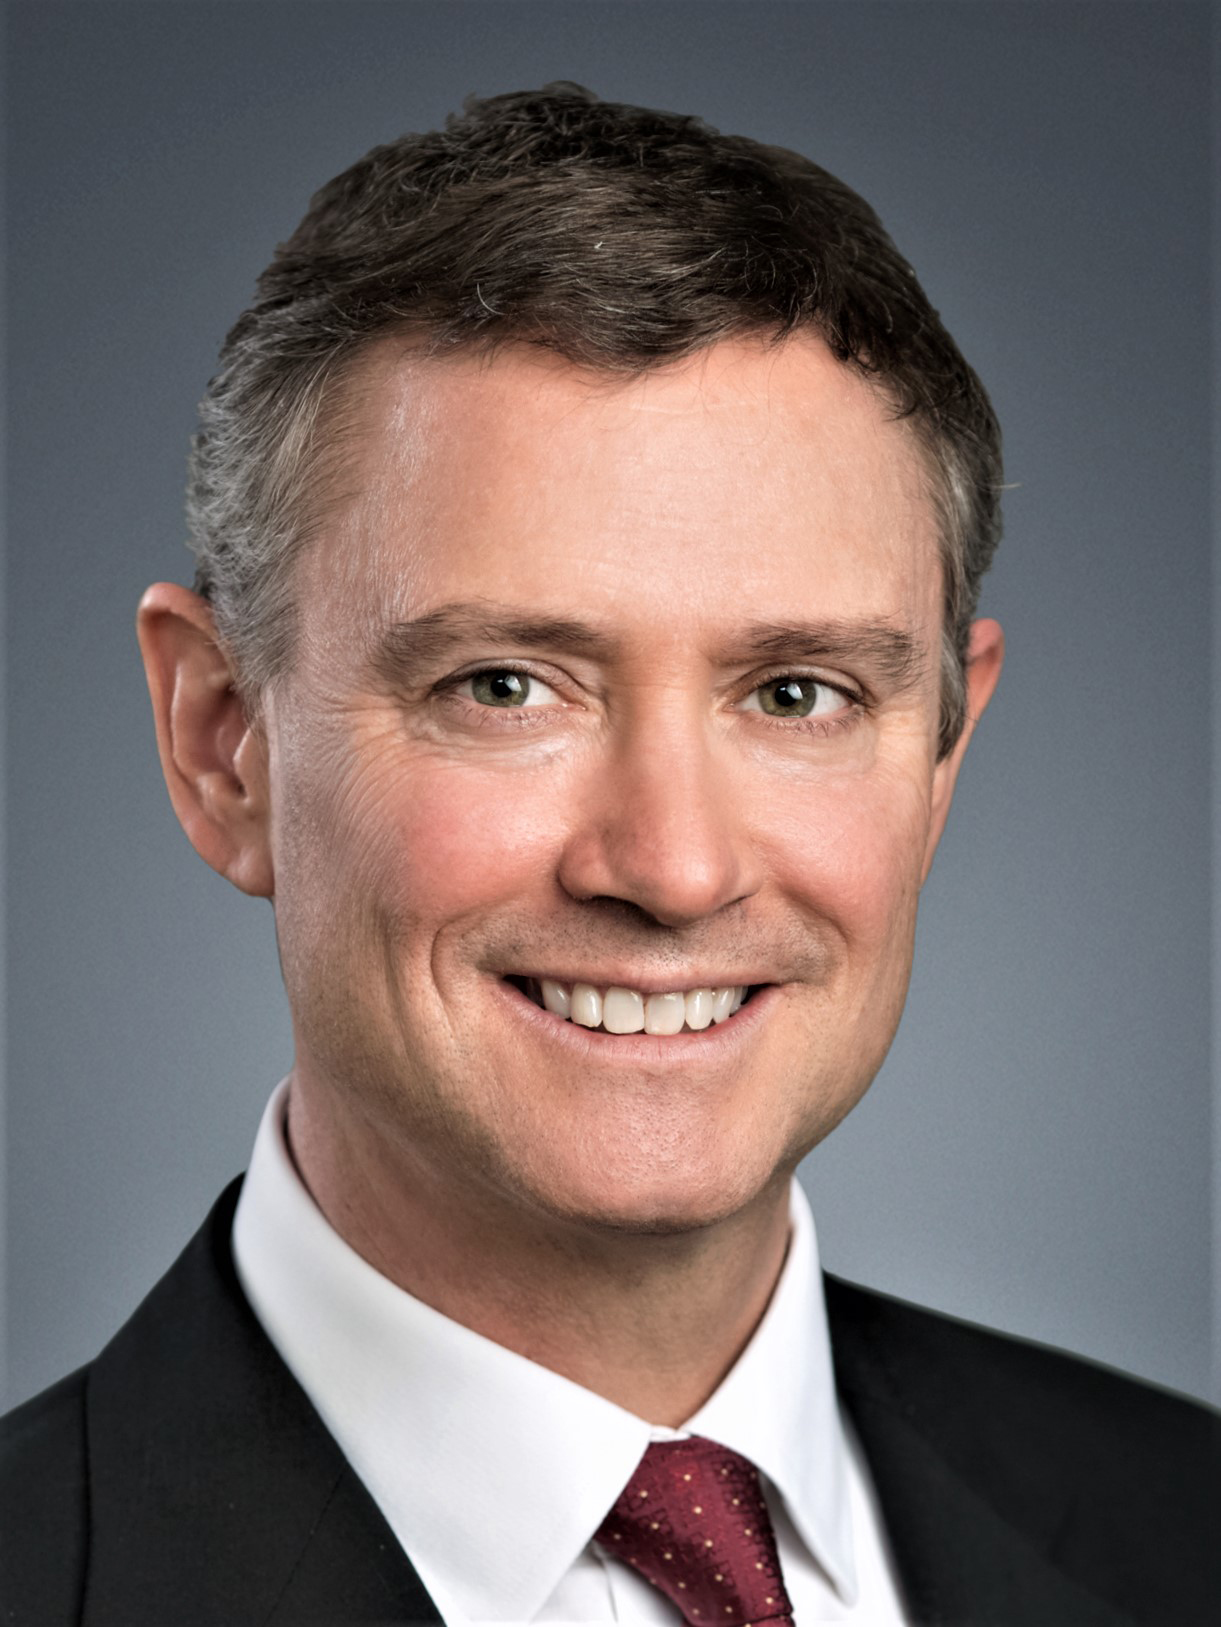 Simon Haynes poses wearing a dark suit, white dress shirt and red tie on a solid grey background.